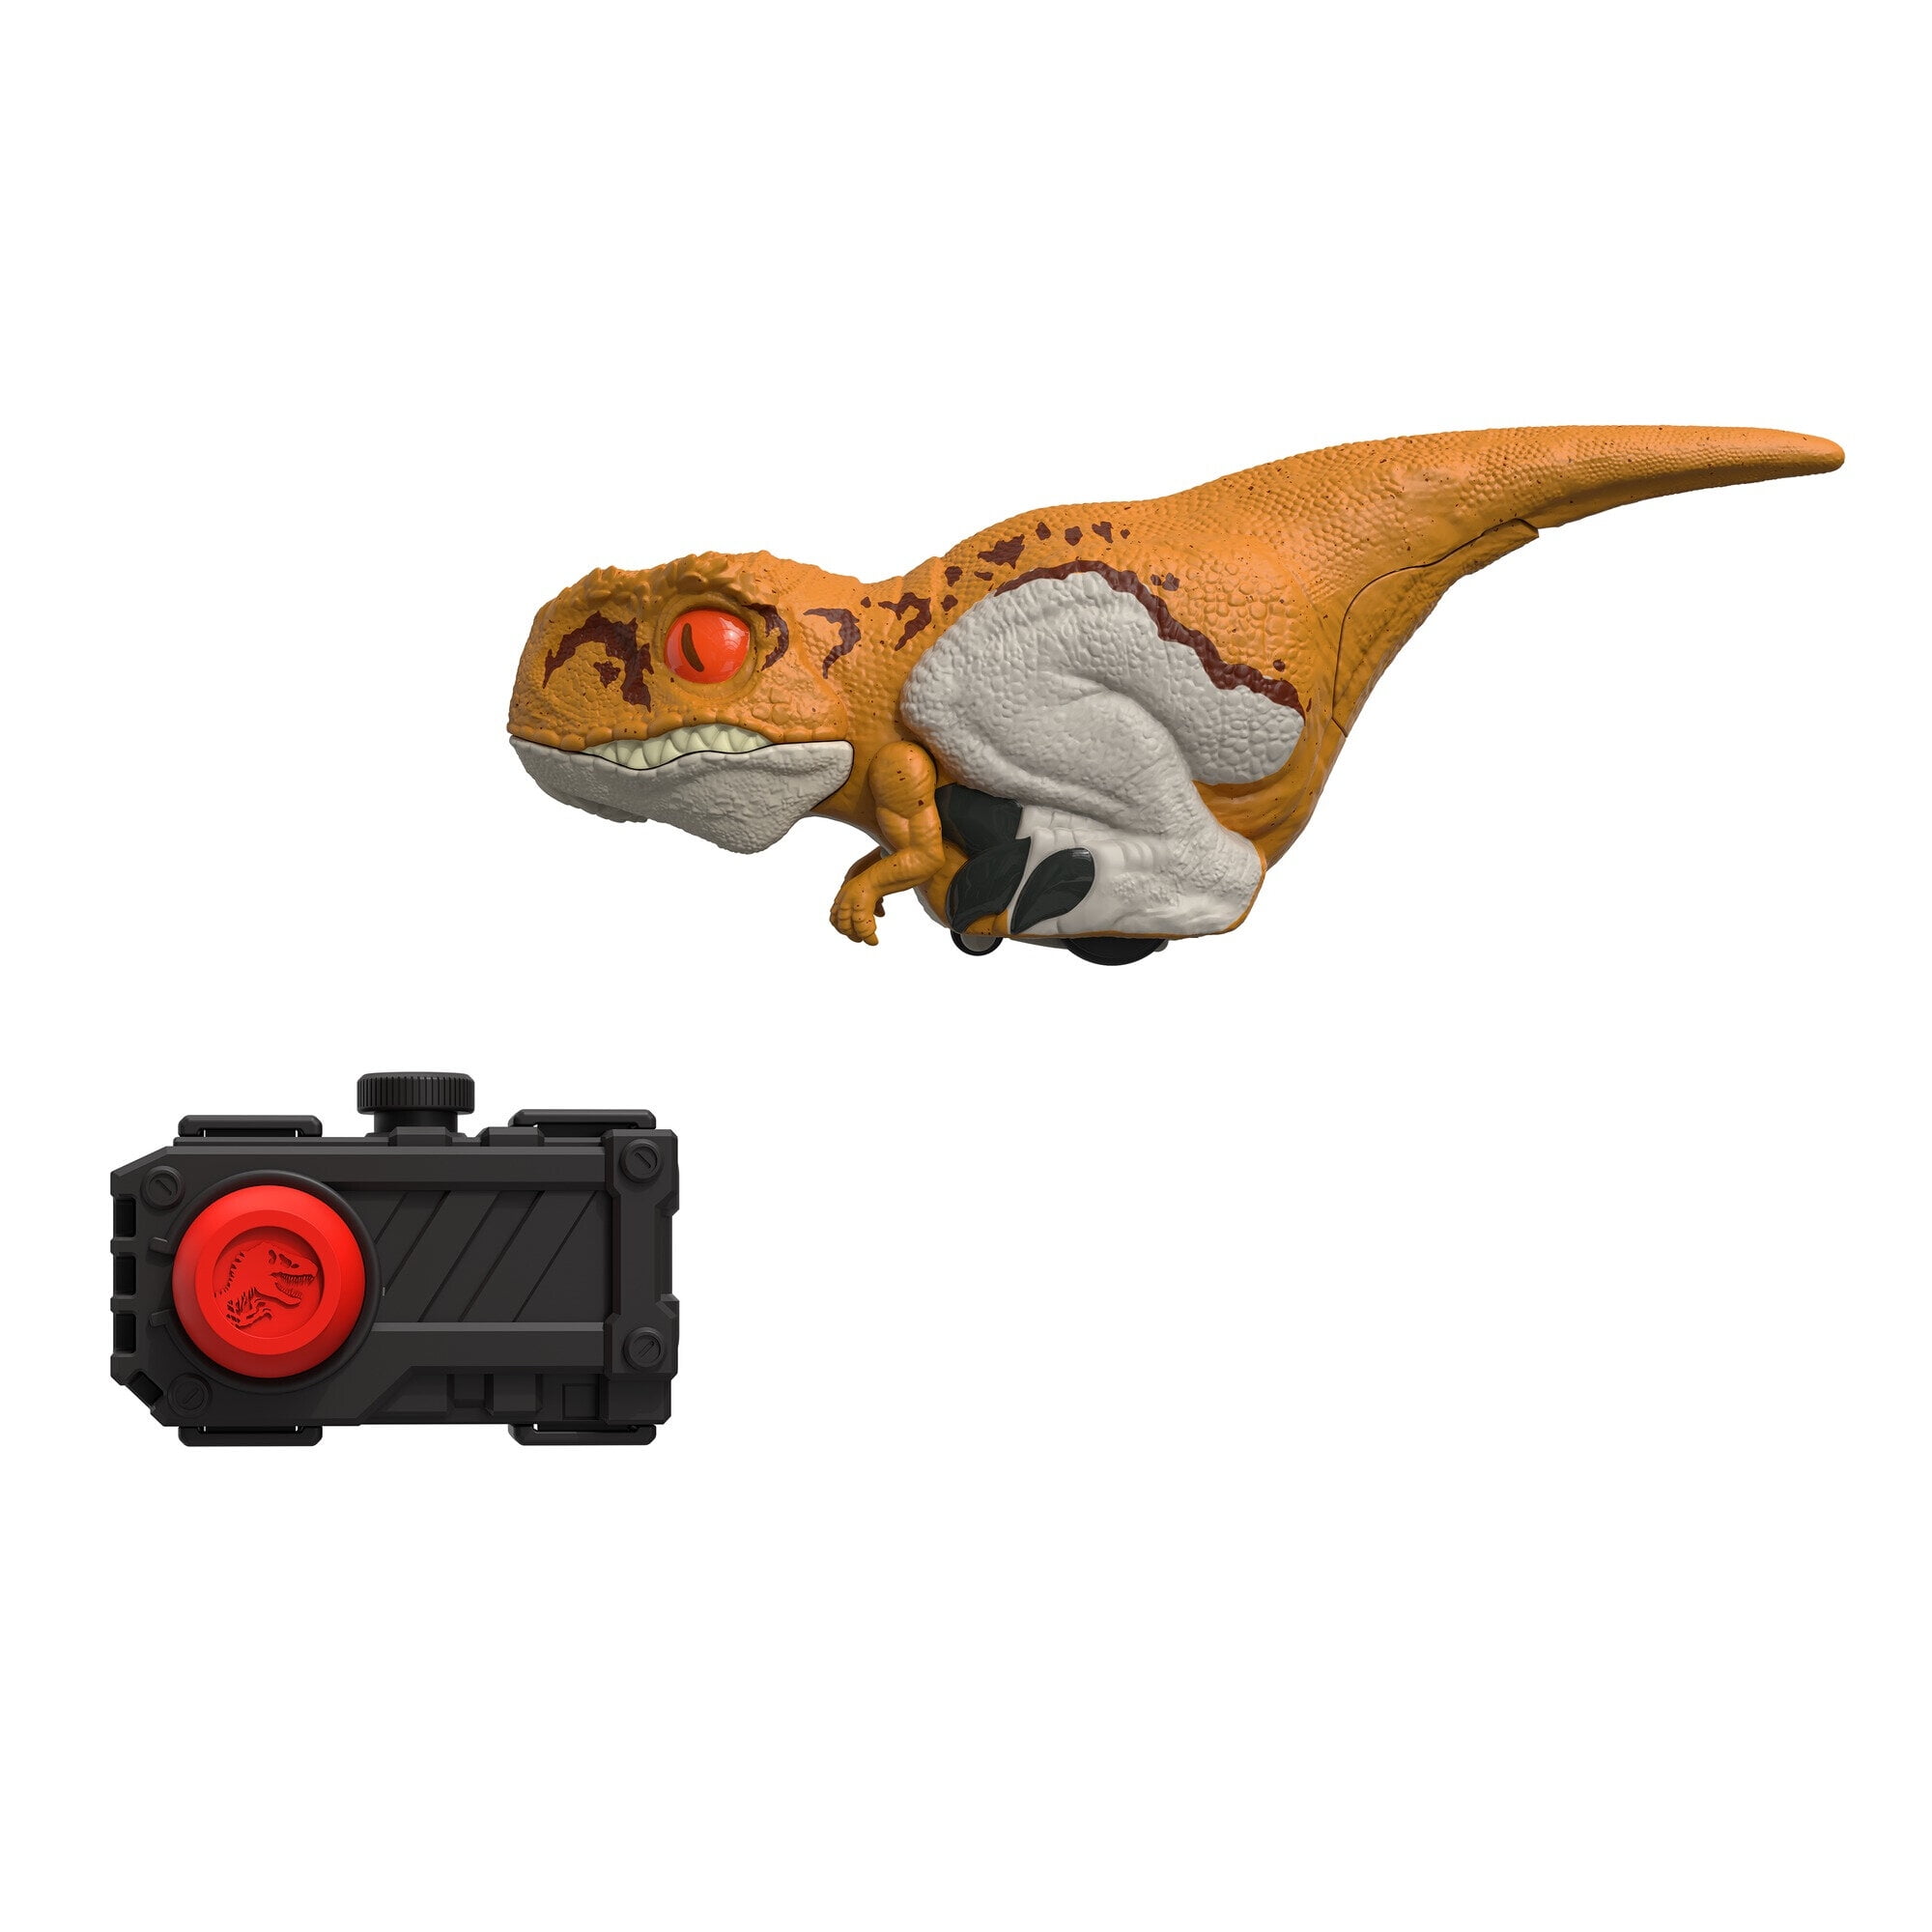 Jurassic World Dominion Uncaged Rowdy Roars Dilophosaurus Dinosaur Action Figure Toy Gift with Interactive Motion and Sound Touch Response 